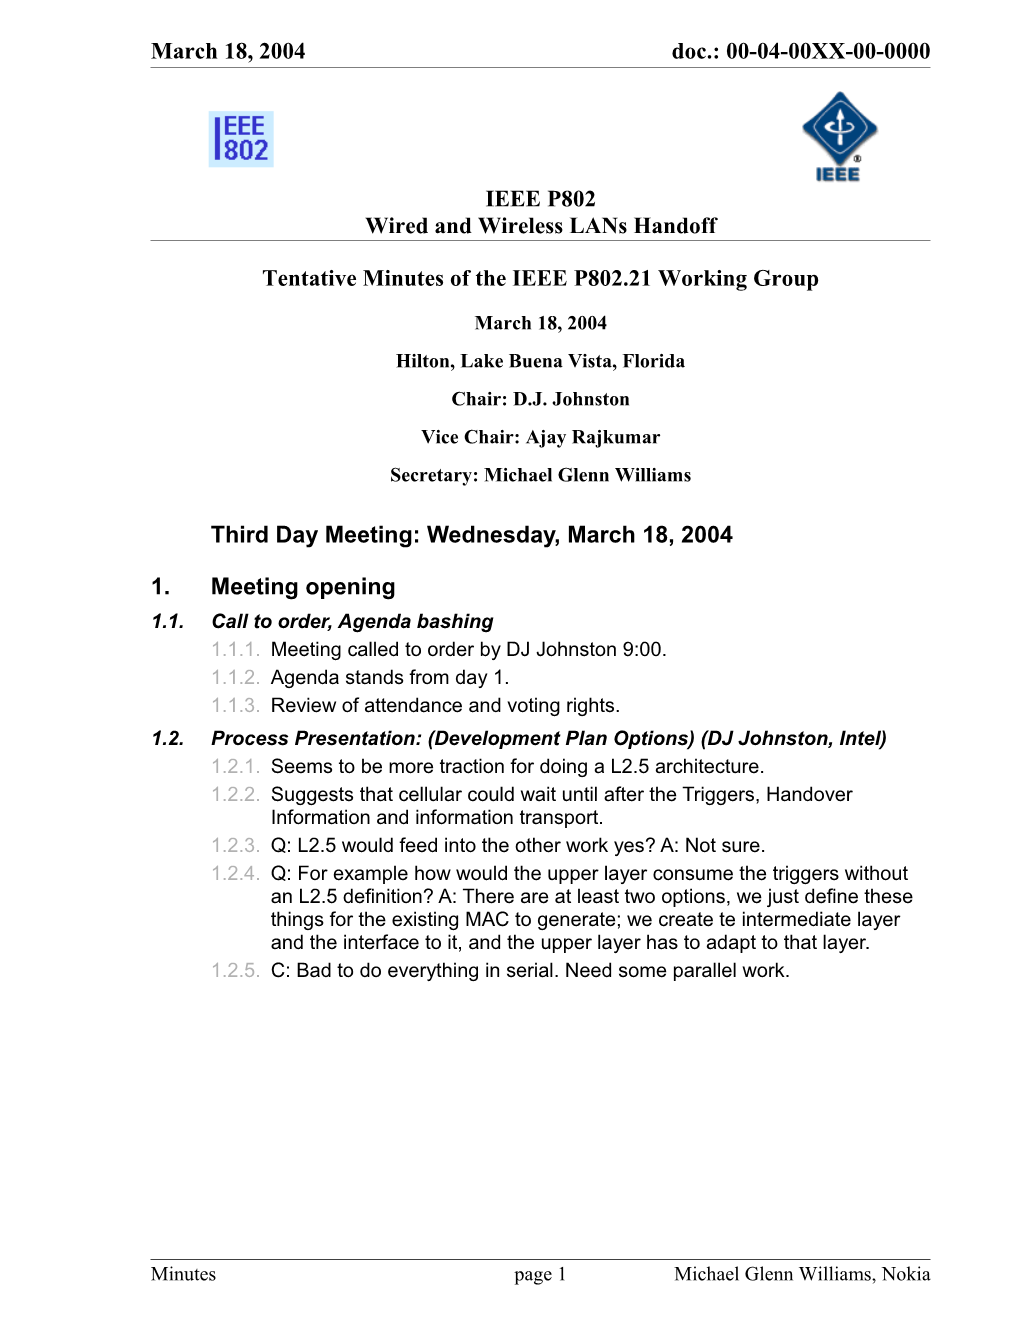 Tentative Minutes of the IEEE P802.21 Working Group